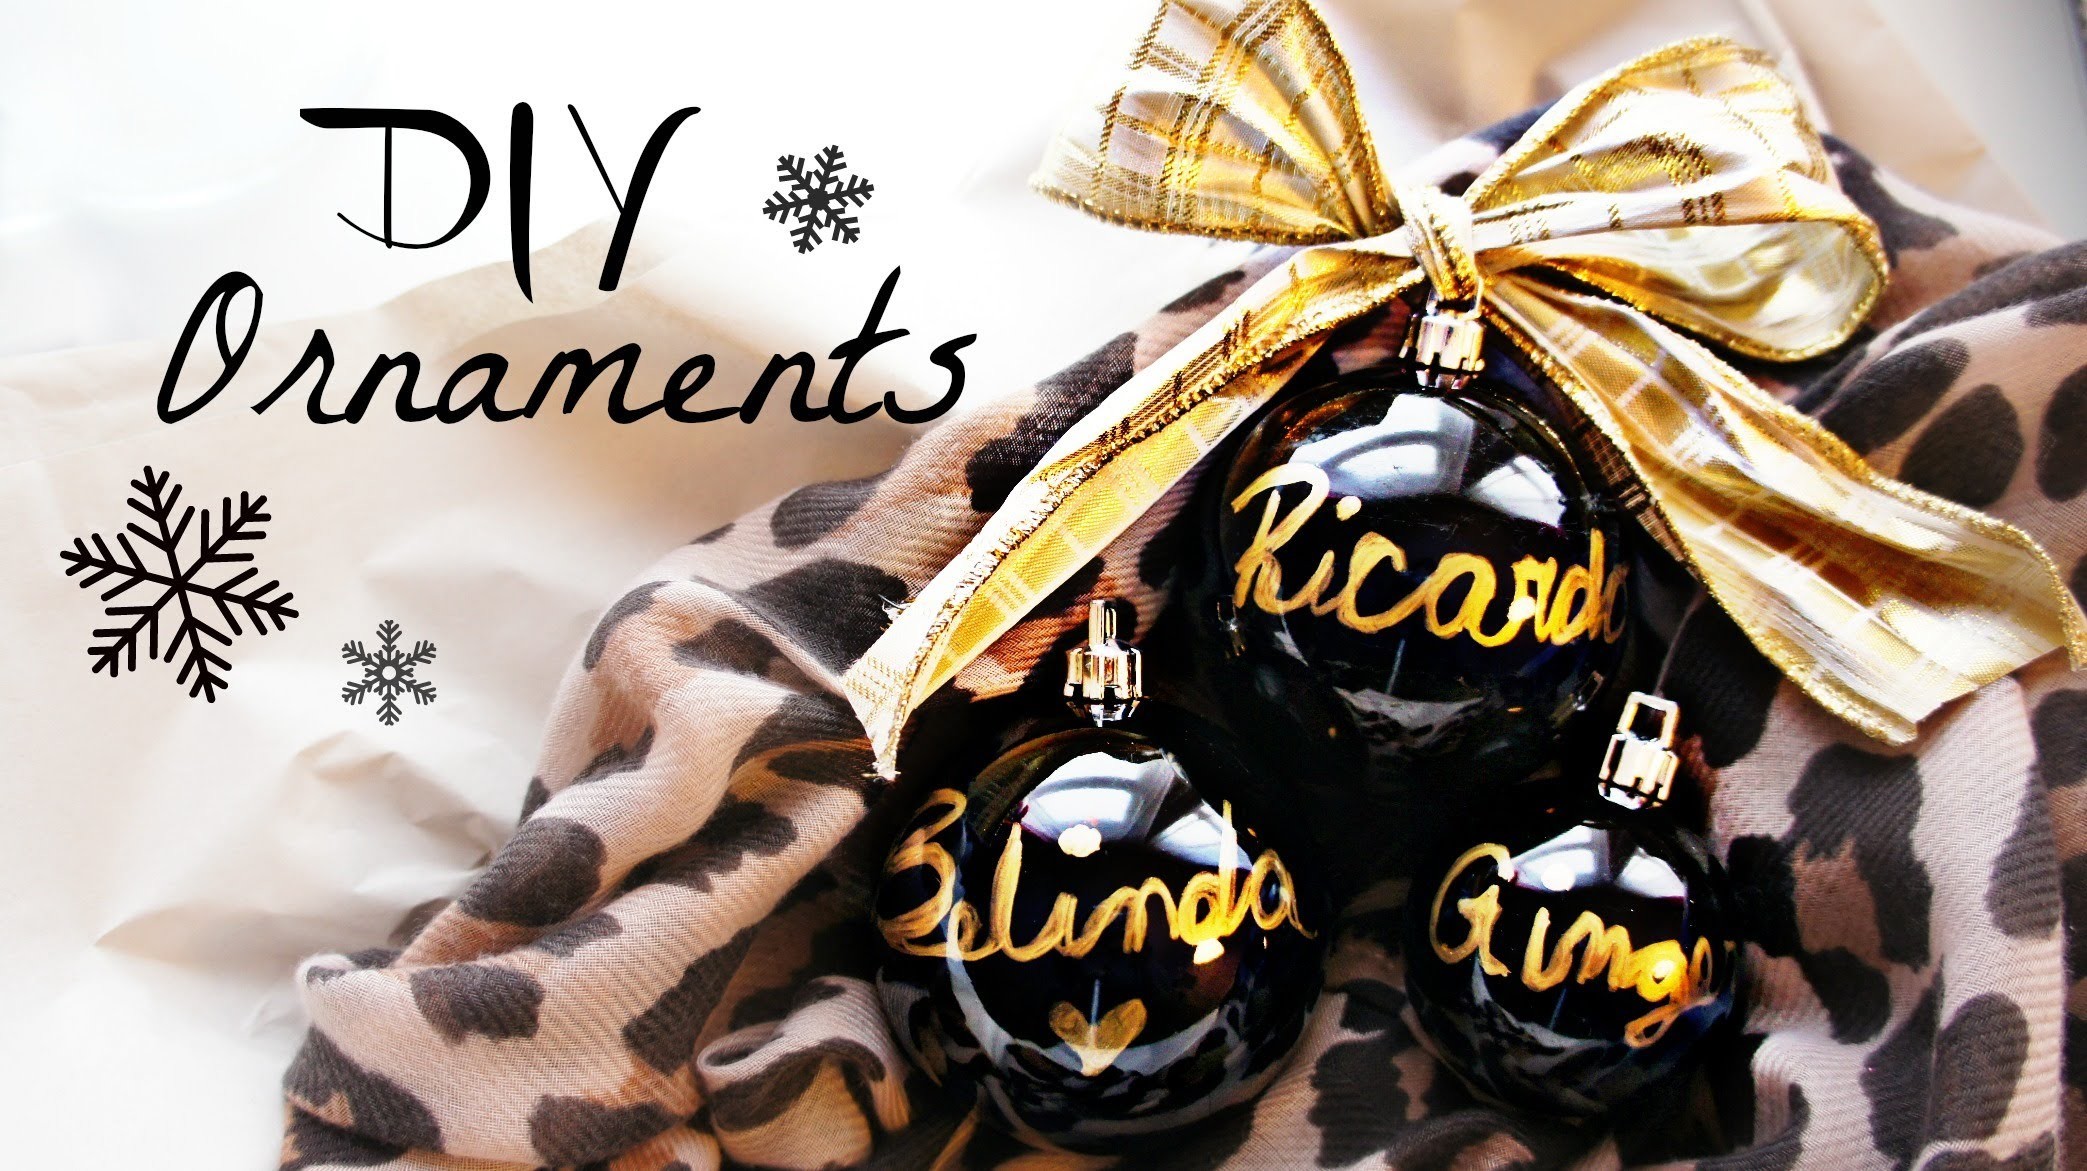 DIY Christmas Ornaments Collab with MsBtrendy